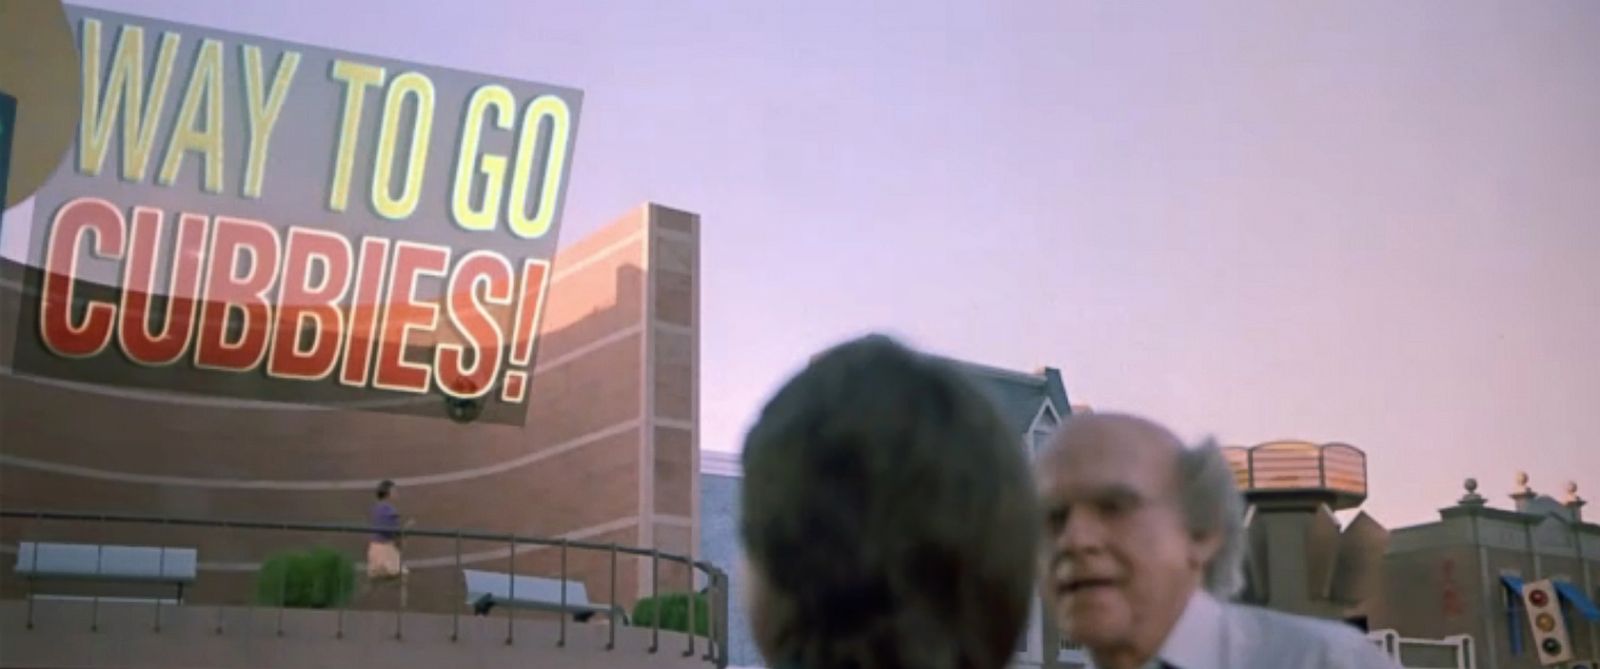 PHOTO: A screen grab from the movie "Back to The Future Part II".